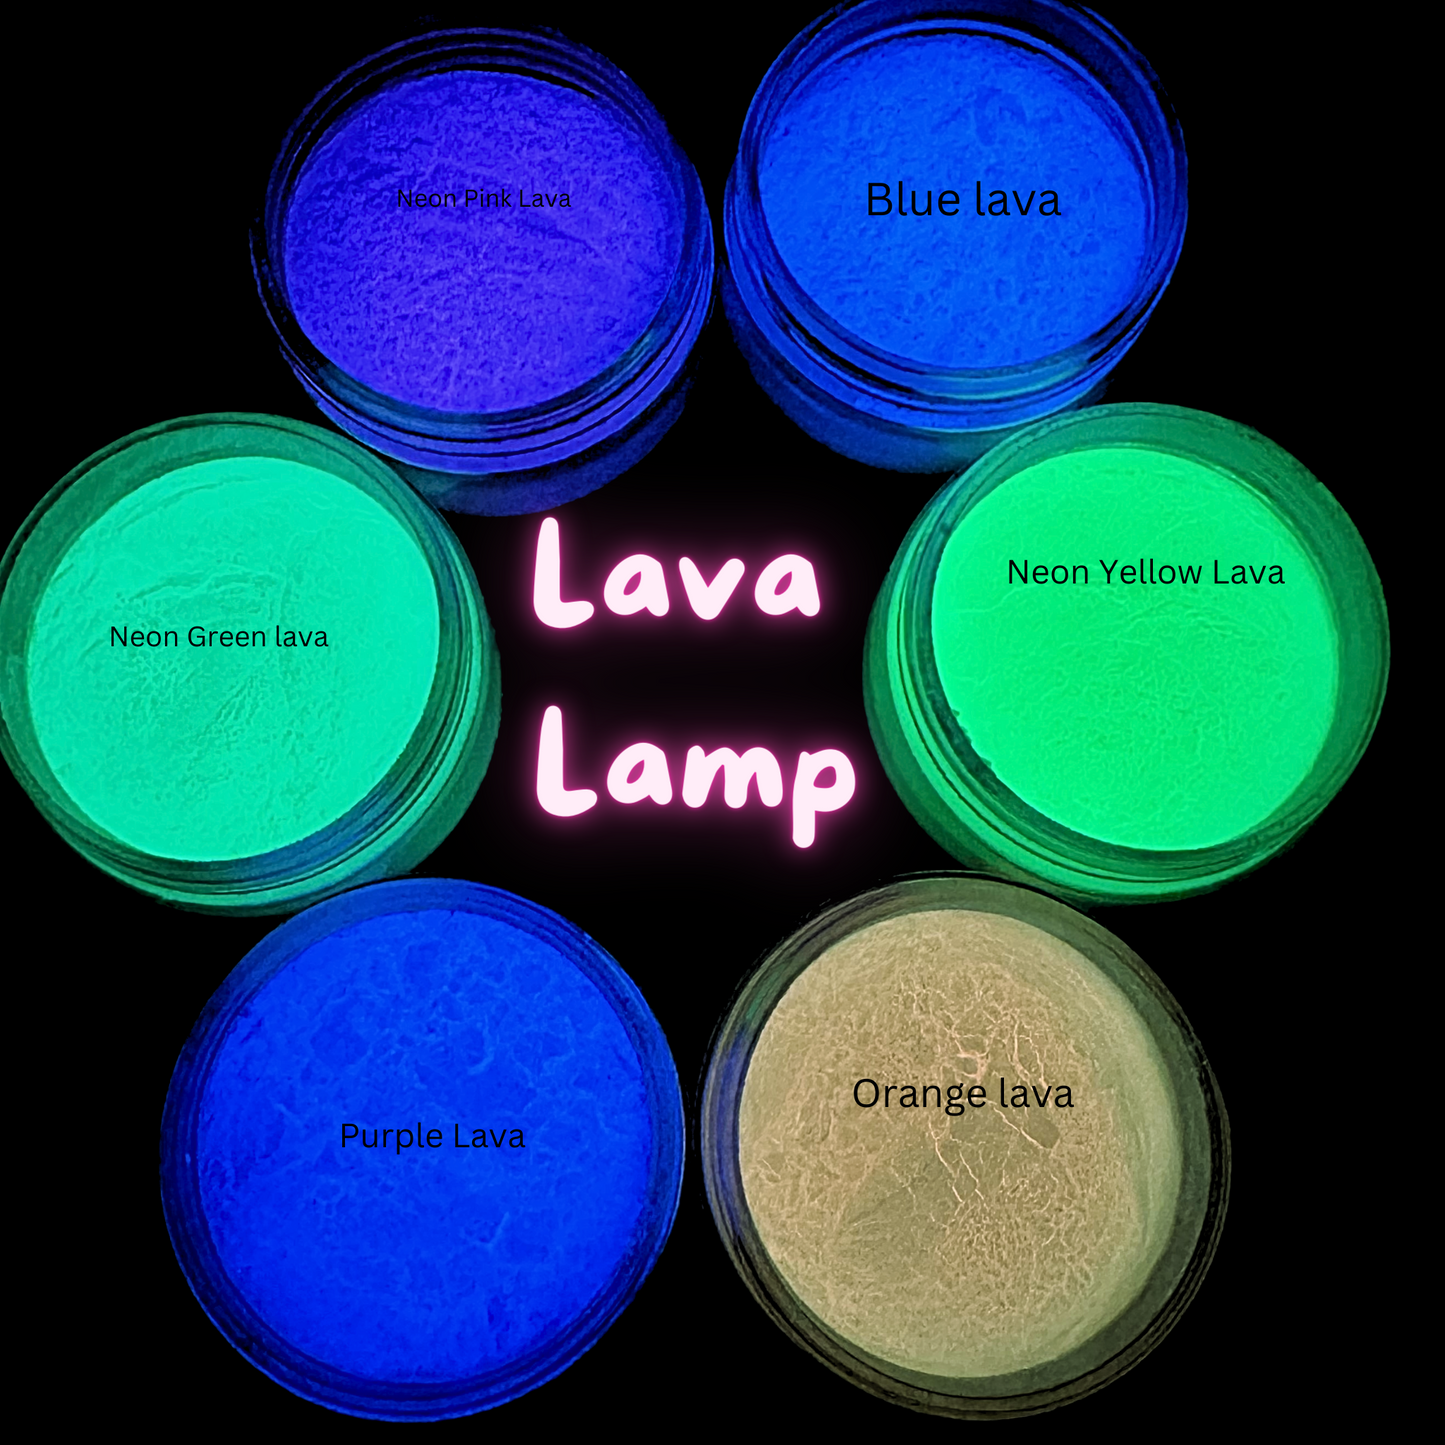 Lava Lamp 6 oz Glow Mica Set With a FREE Mica Spoon! No Coupons